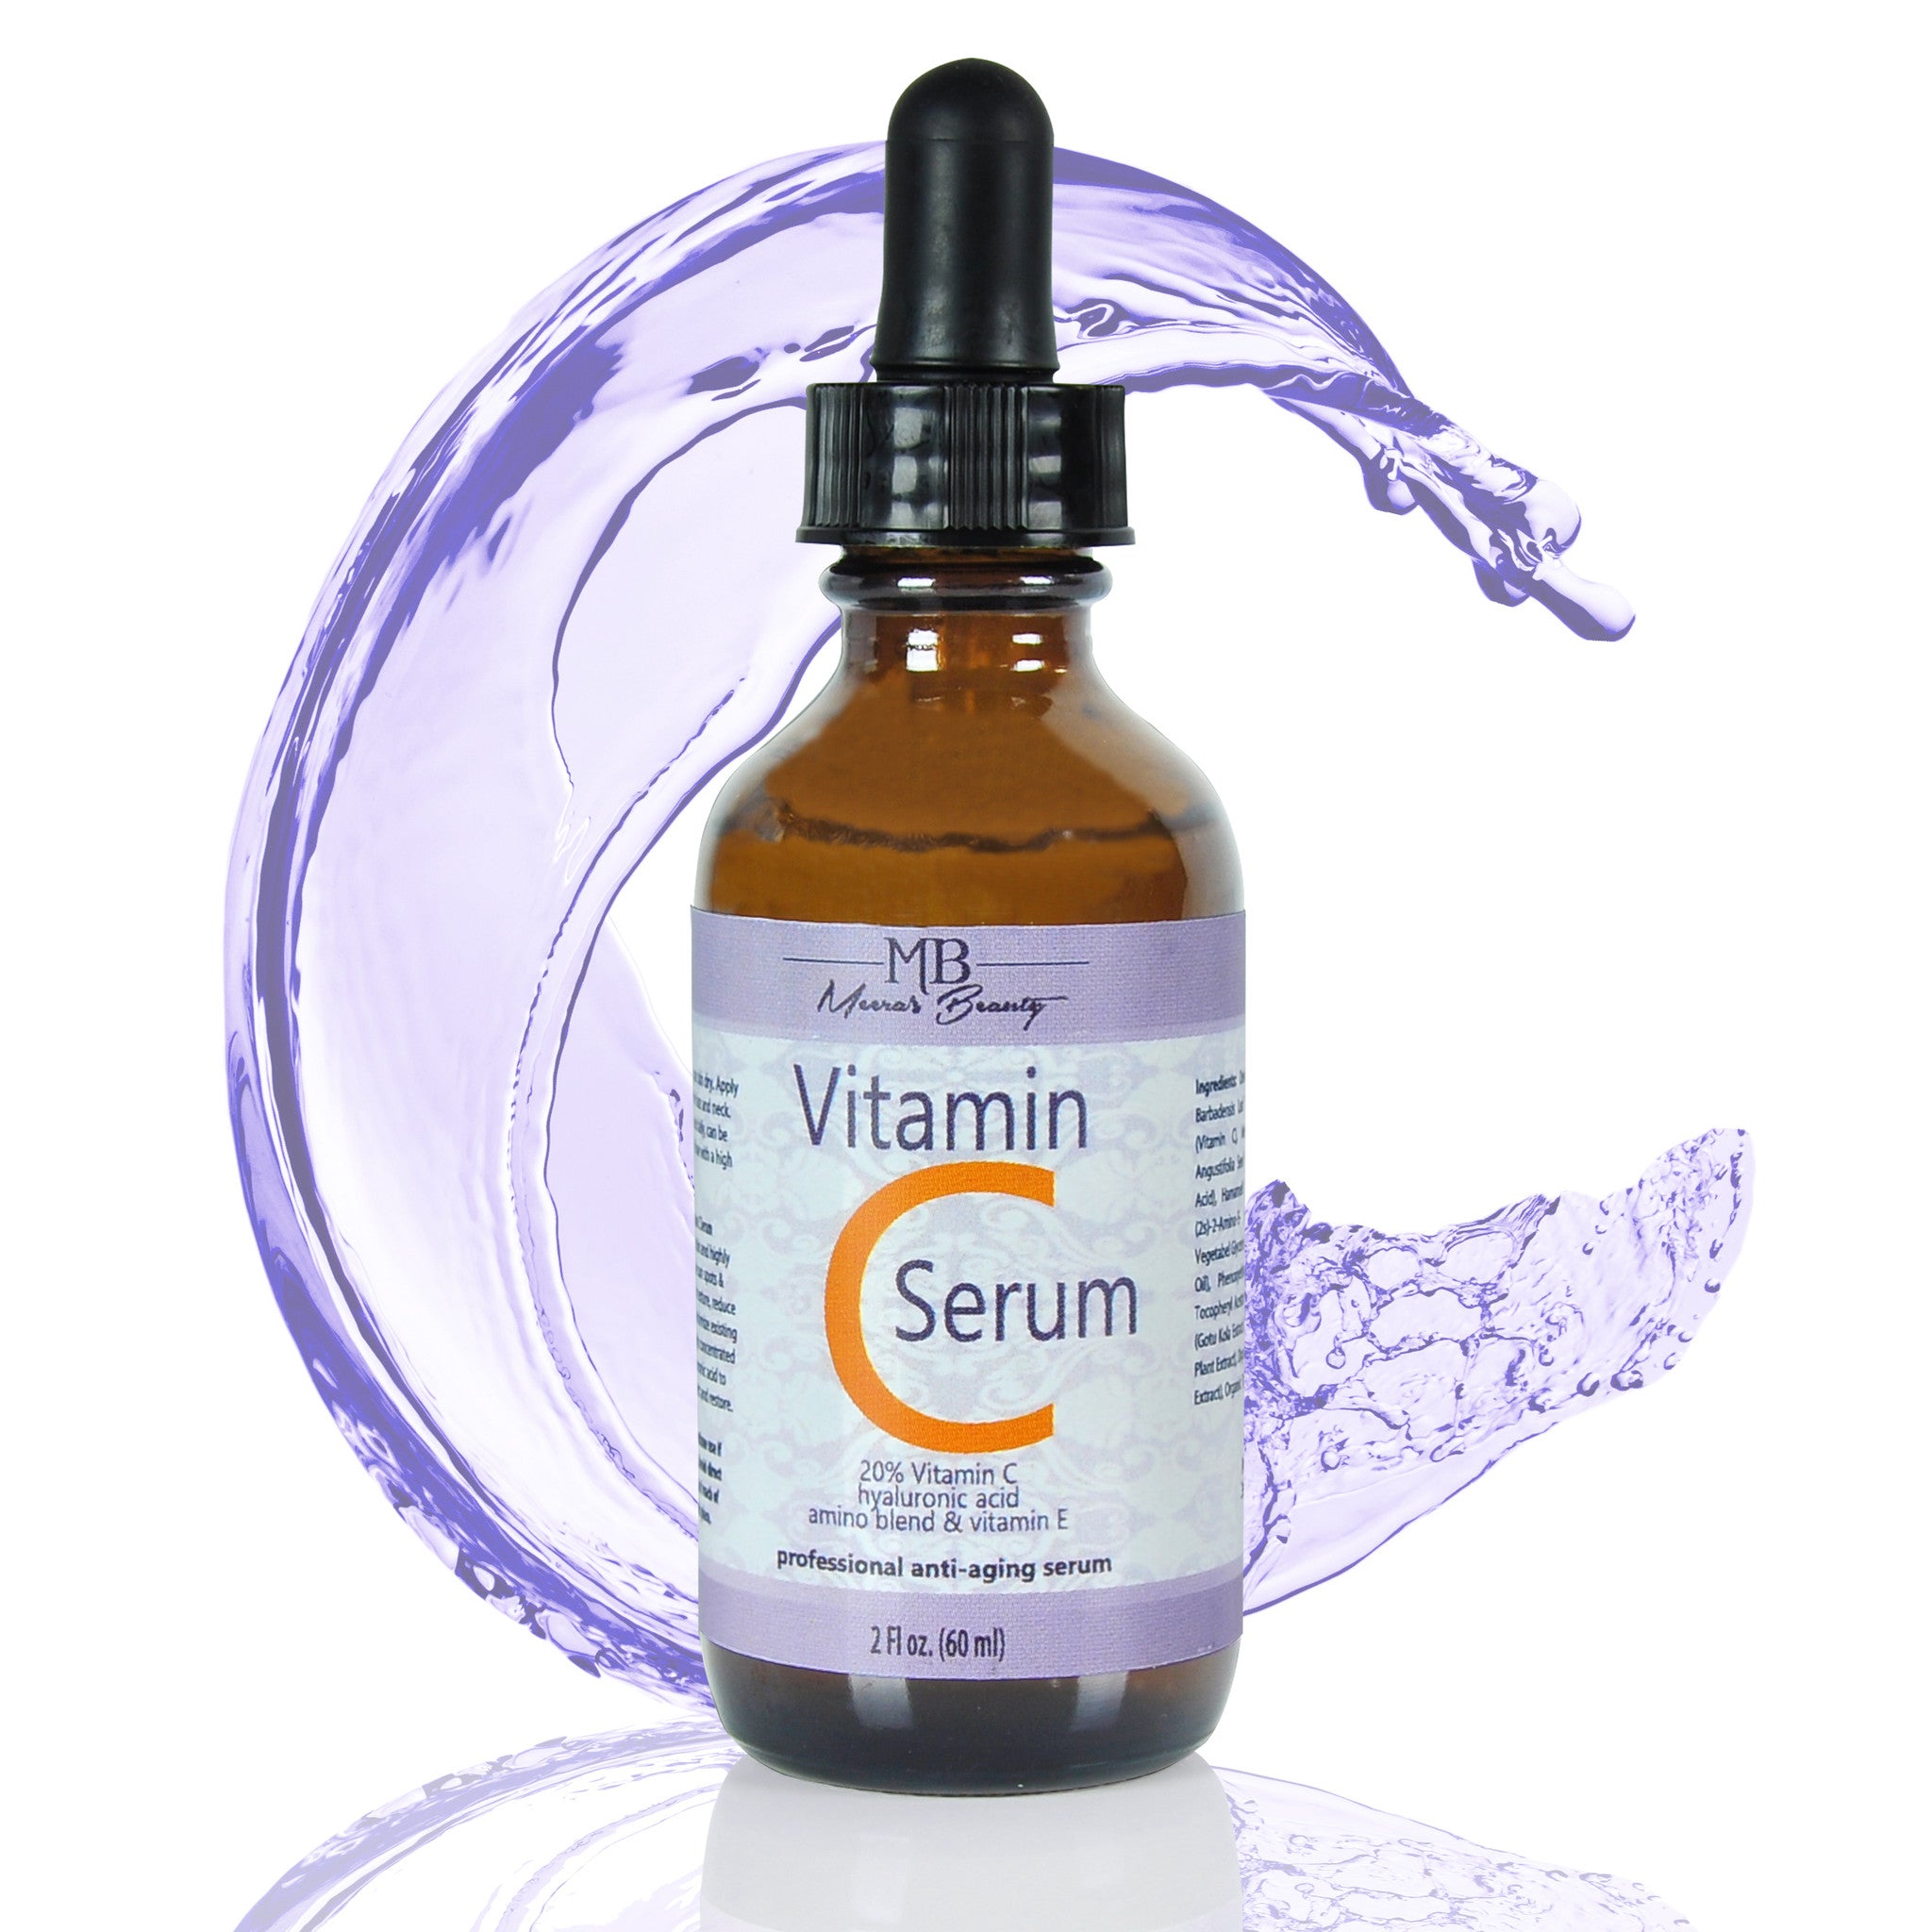 DOUBLE SIZED (2 oz) PURE VITAMIN C SERUM FOR FACE 20% With Hyaluronic Acid - Anti Wrinkle